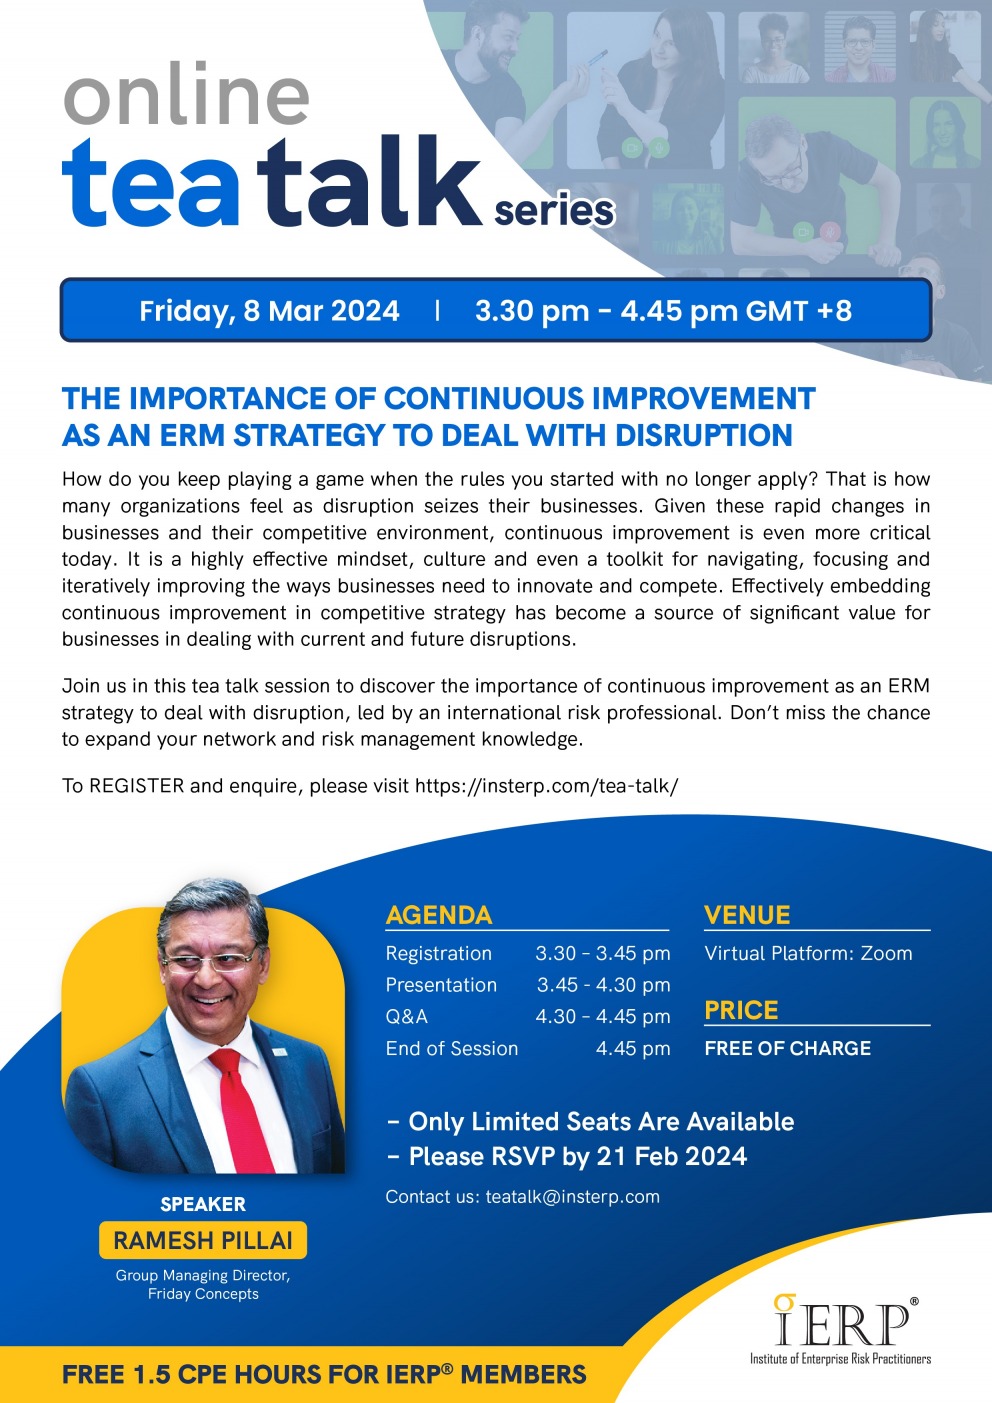 IERP Tea Talk importance of continuous improve as an erm strategy, The IERP's Online Tea Talk Series 2024 - The Importance of Continuous Improvement as an ERM Strategy to Deal with Disruption